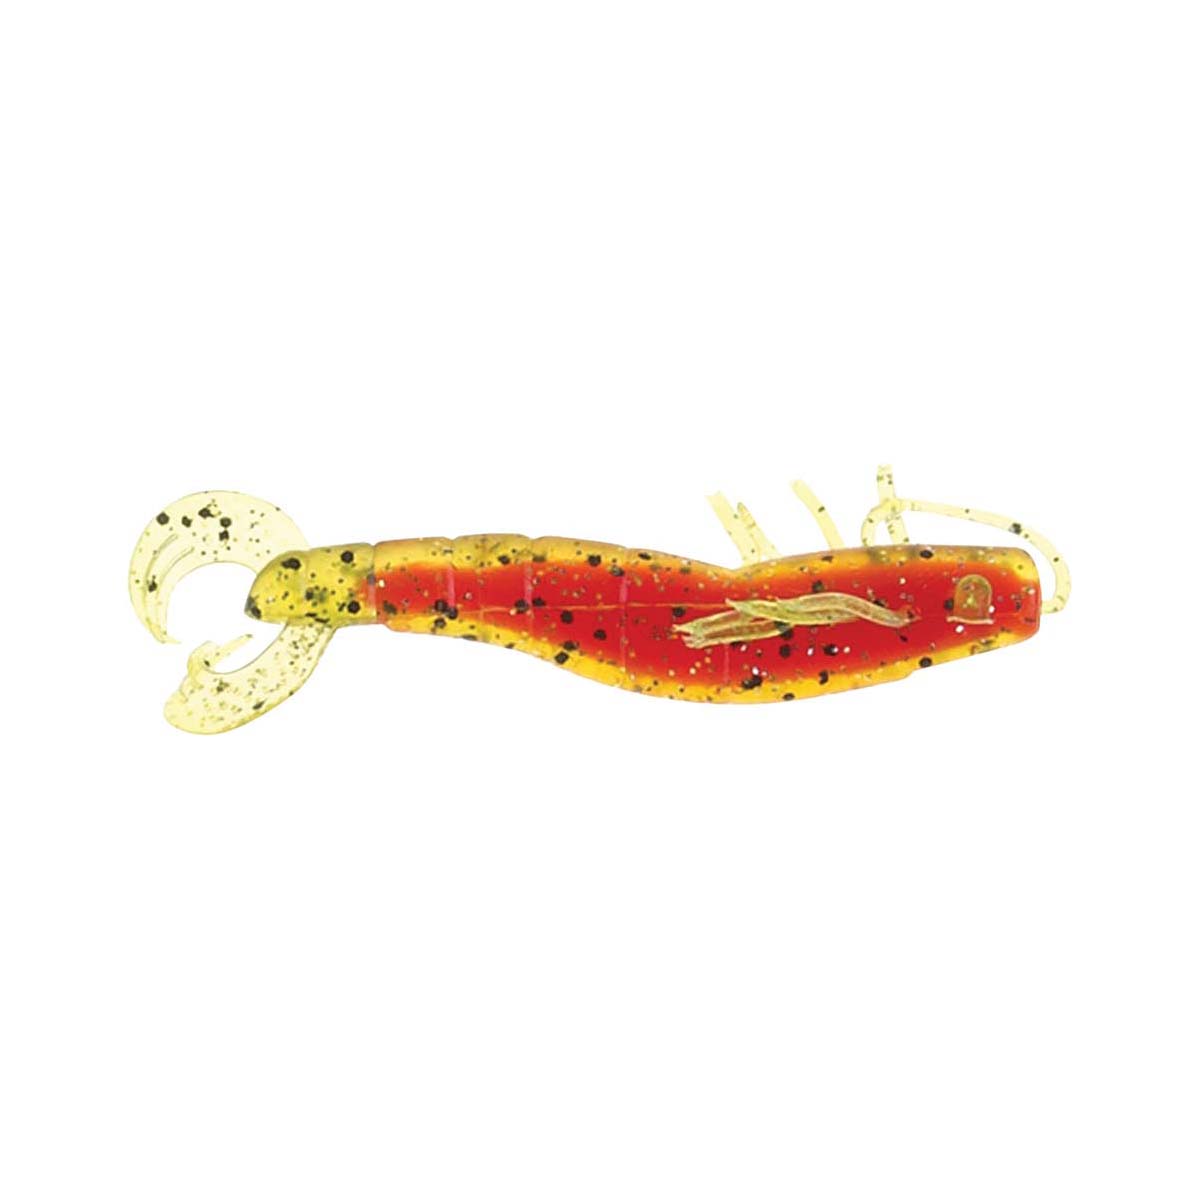 Atomic Plazos Prong Soft Plastic Lure 4in Radioactive Rooster